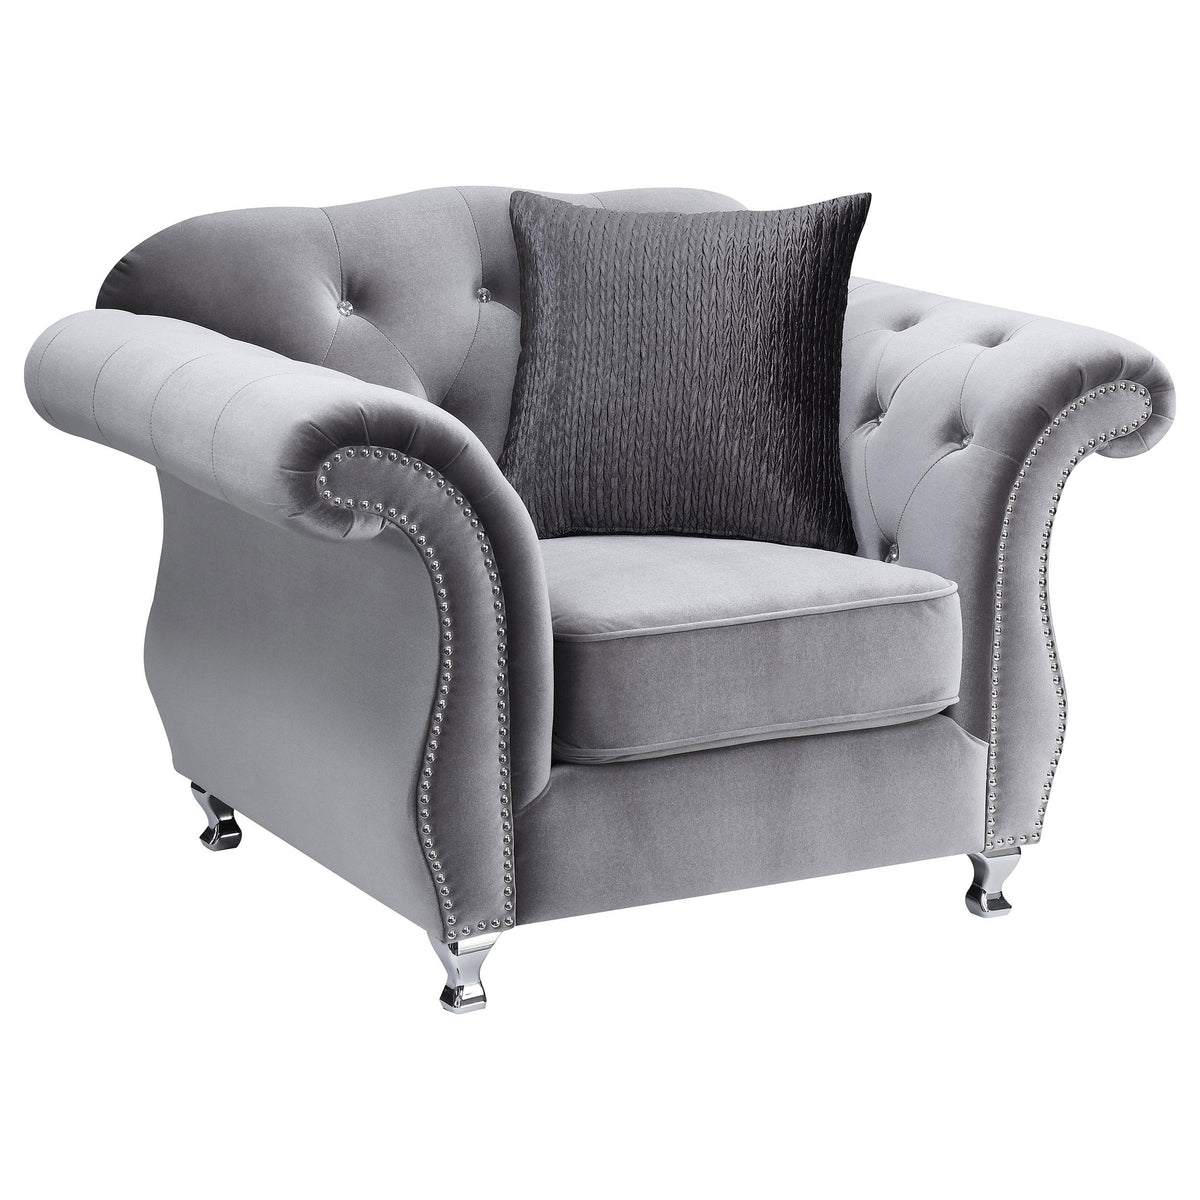 Frostine Button Tufted Chair Silver  Las Vegas Furniture Stores